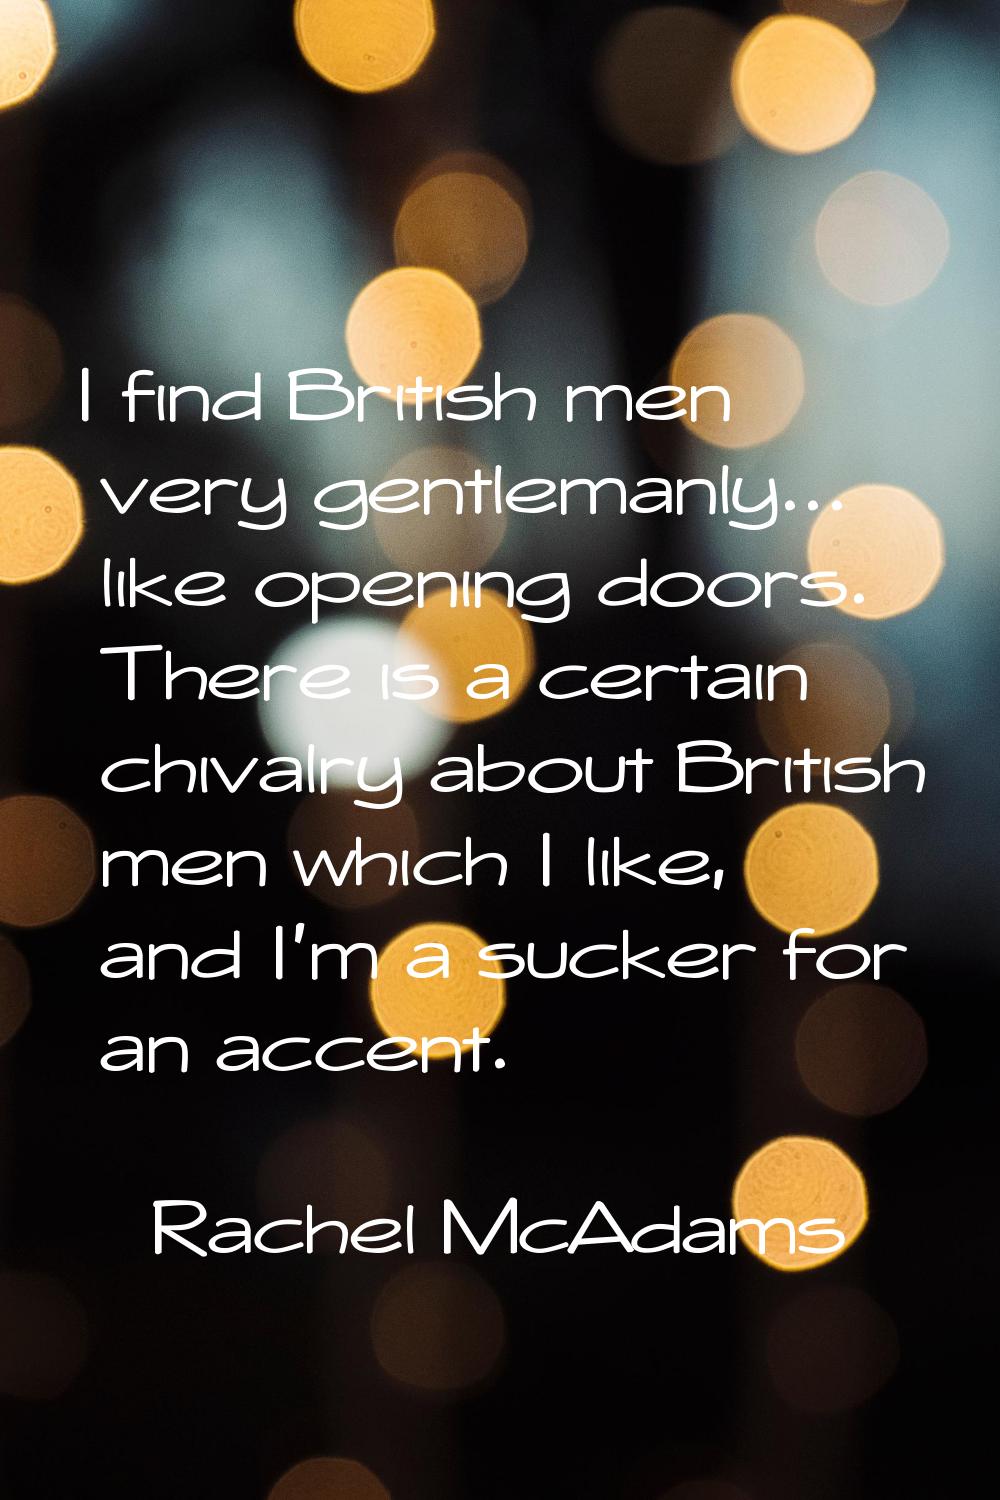 I find British men very gentlemanly... like opening doors. There is a certain chivalry about Britis